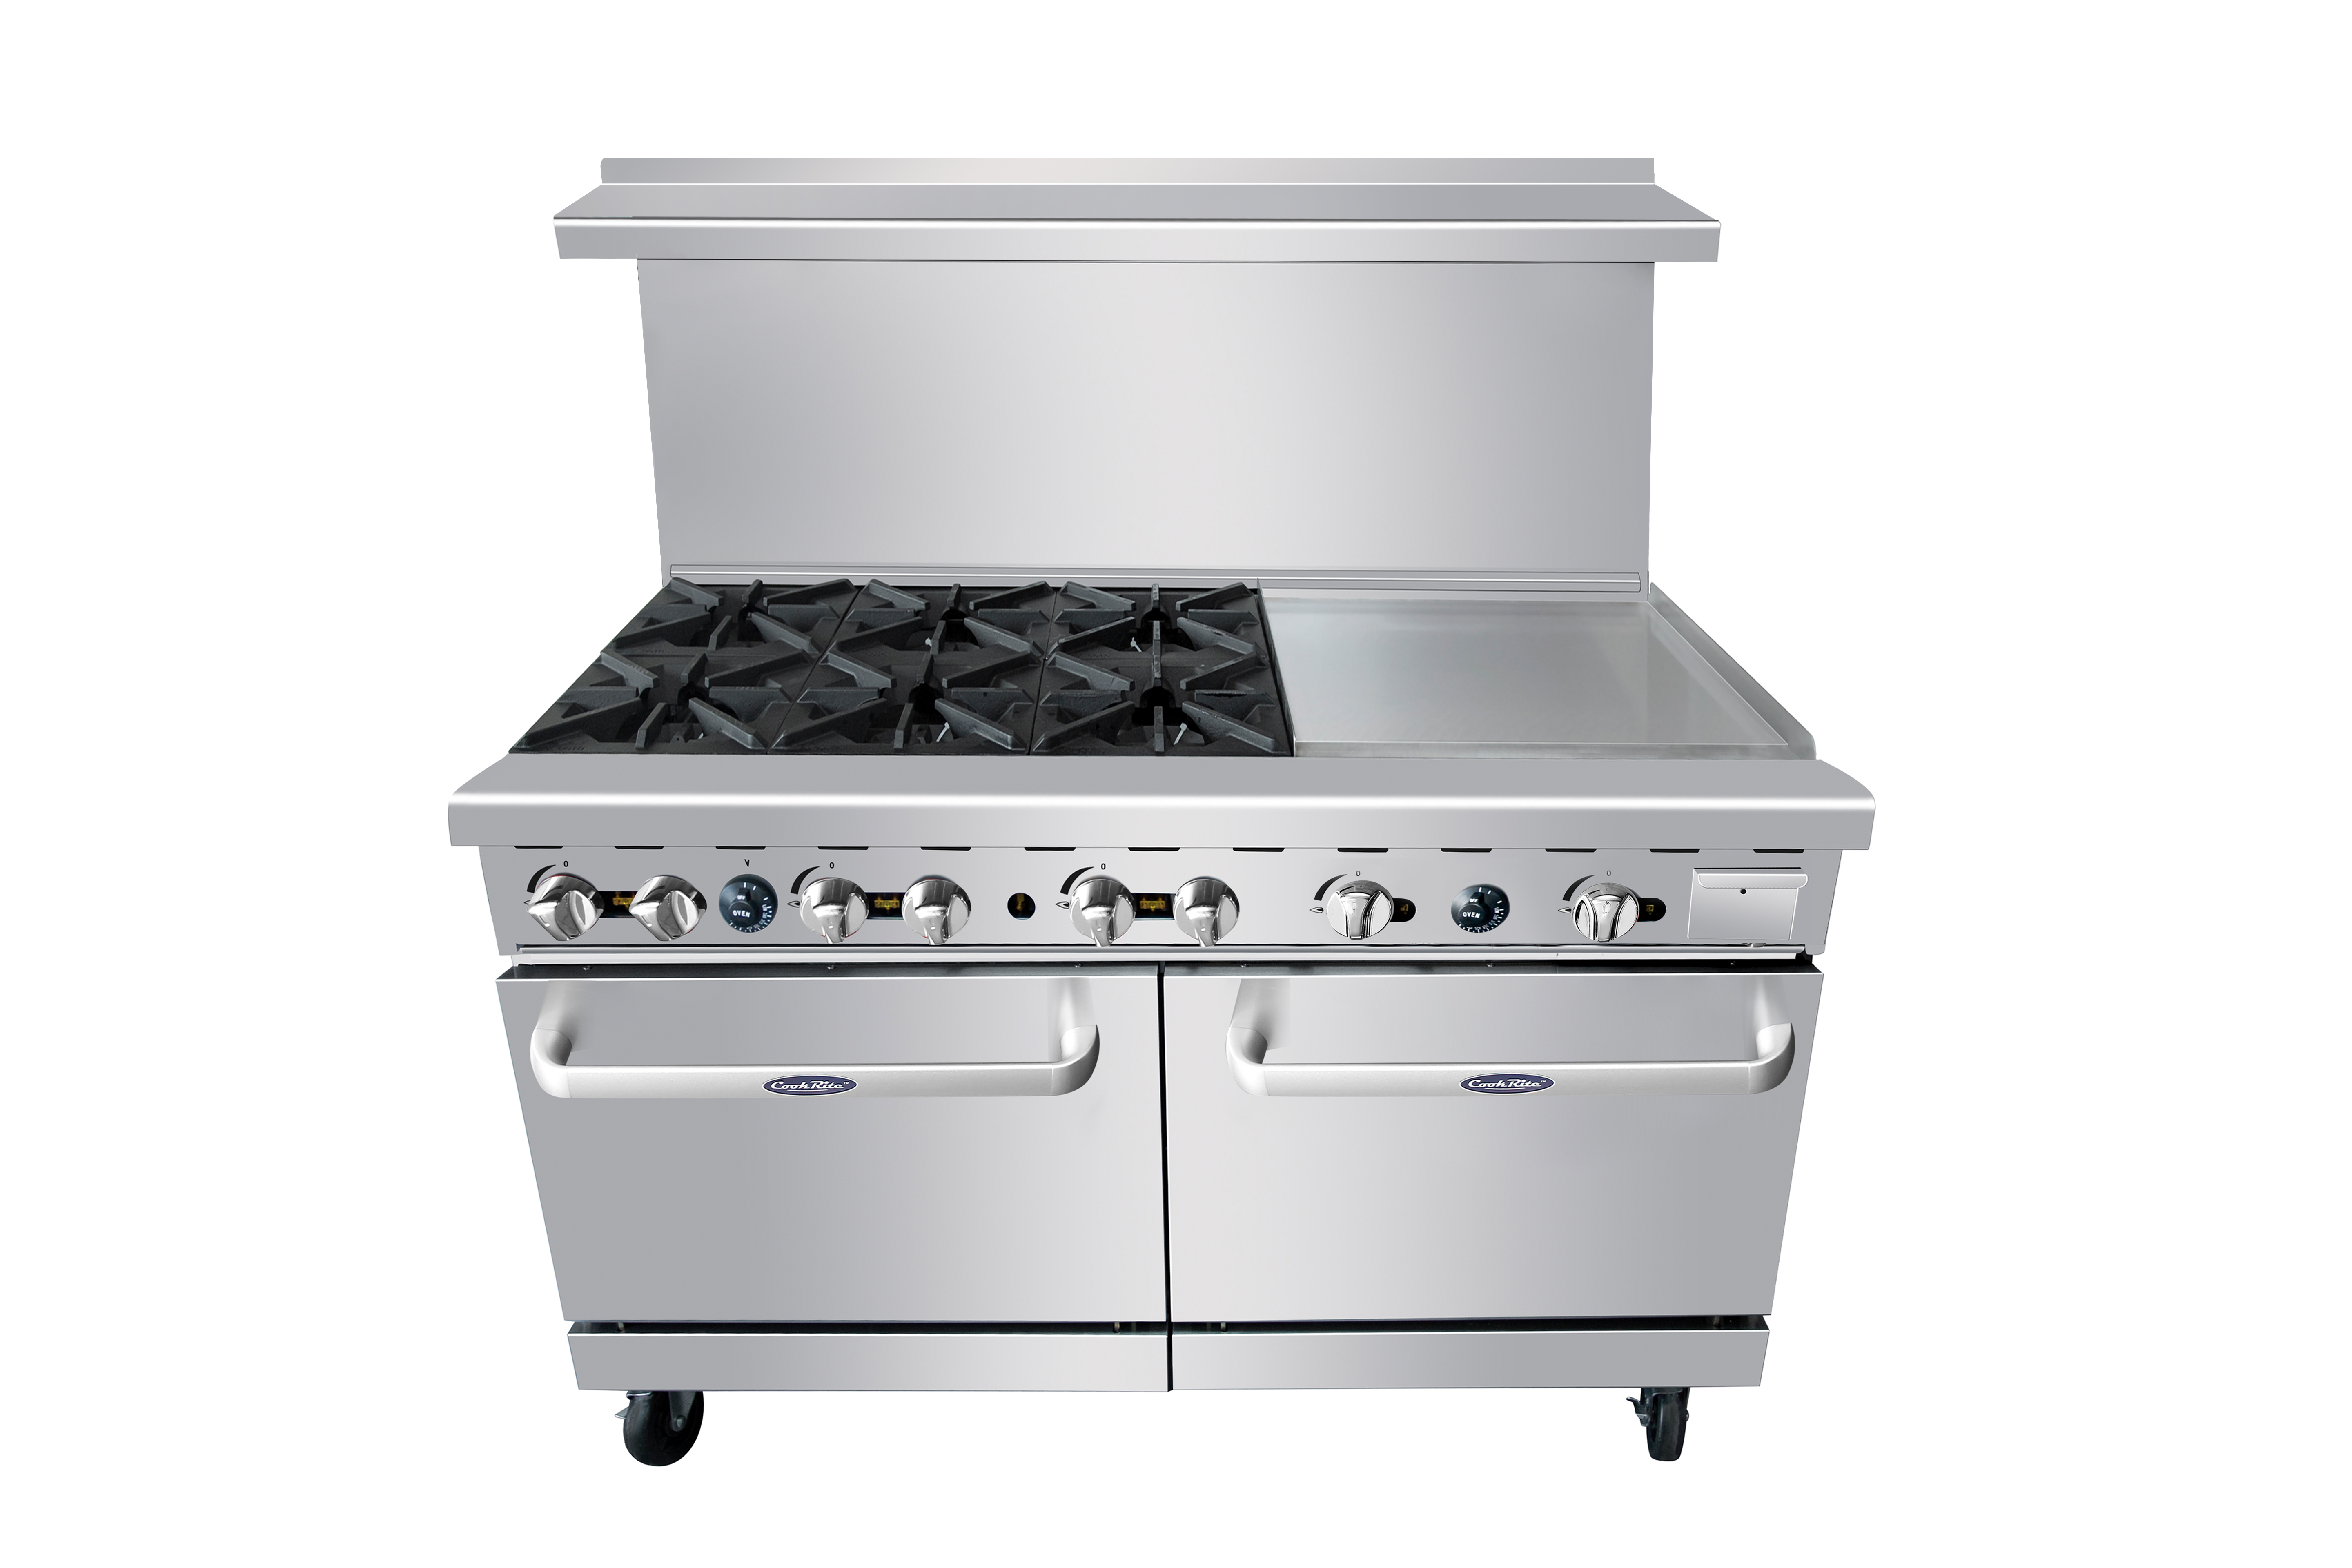 Gas Range with 6 burners and 24 griddle